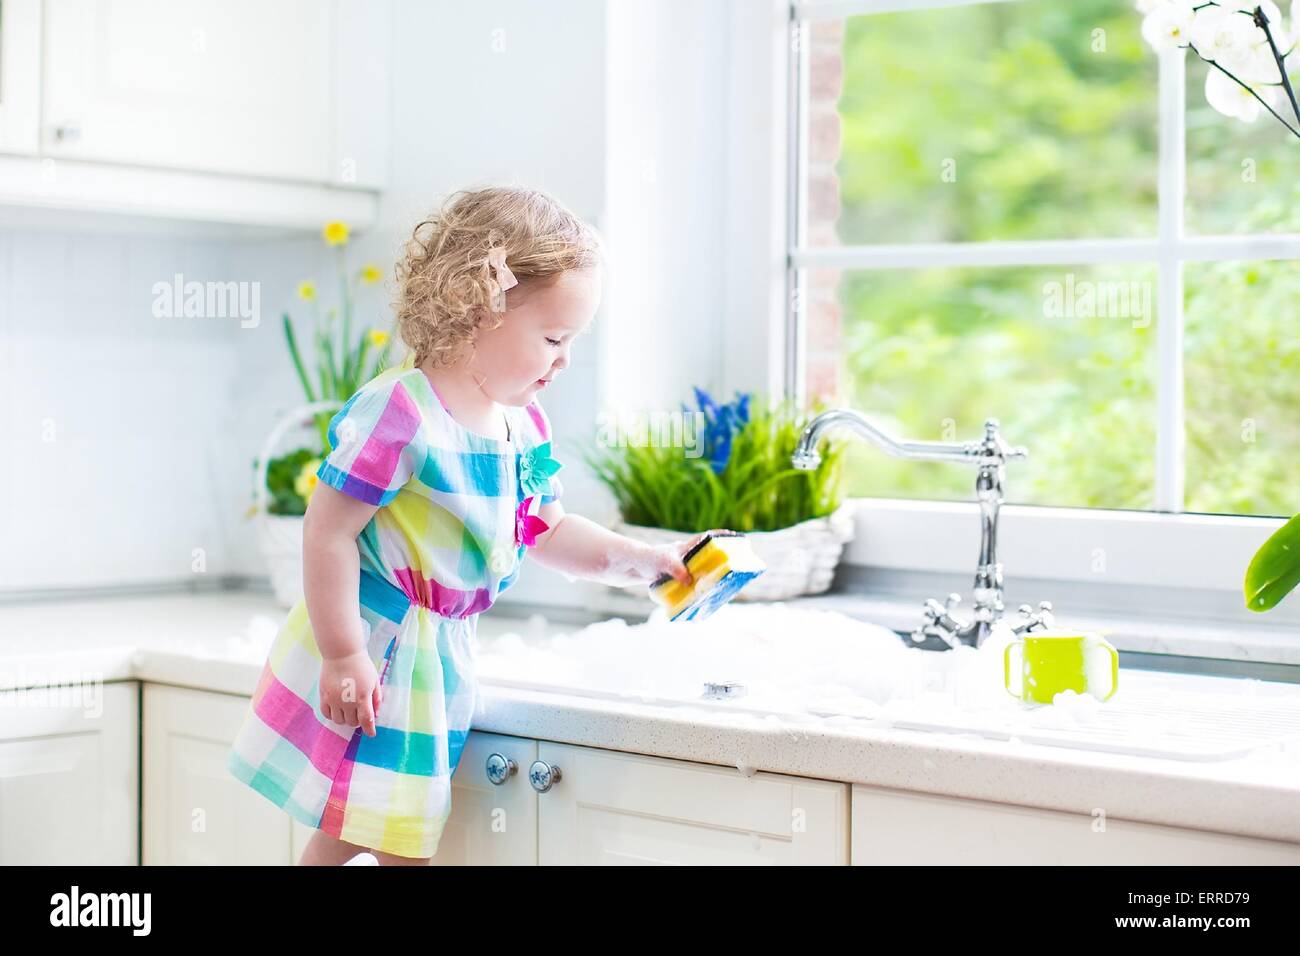 Cute curly toddler girl in colorful dress washing dishes, cleaning with a sponge and playing with foam in the sink in kitchen Stock Photo